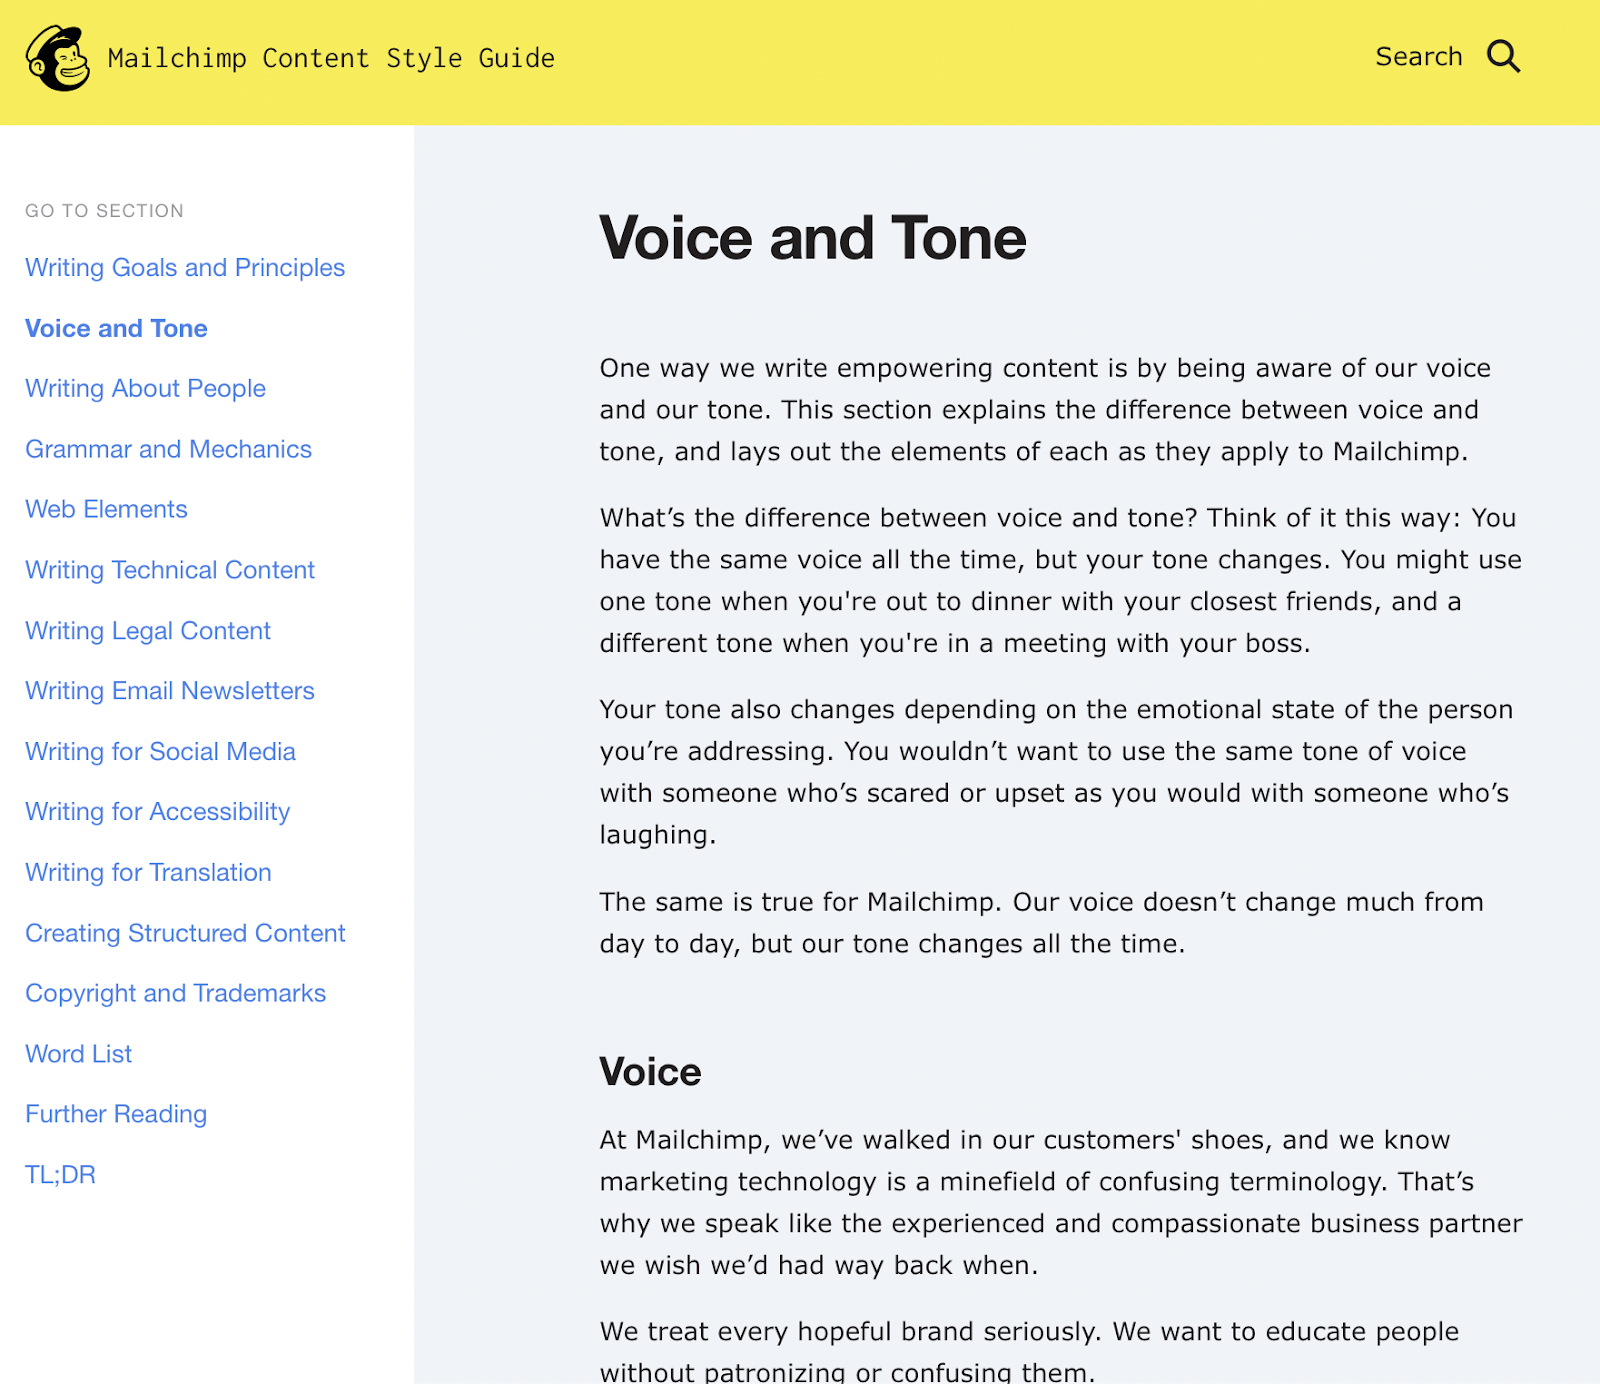 Voice and Tone Example from Mailchimp